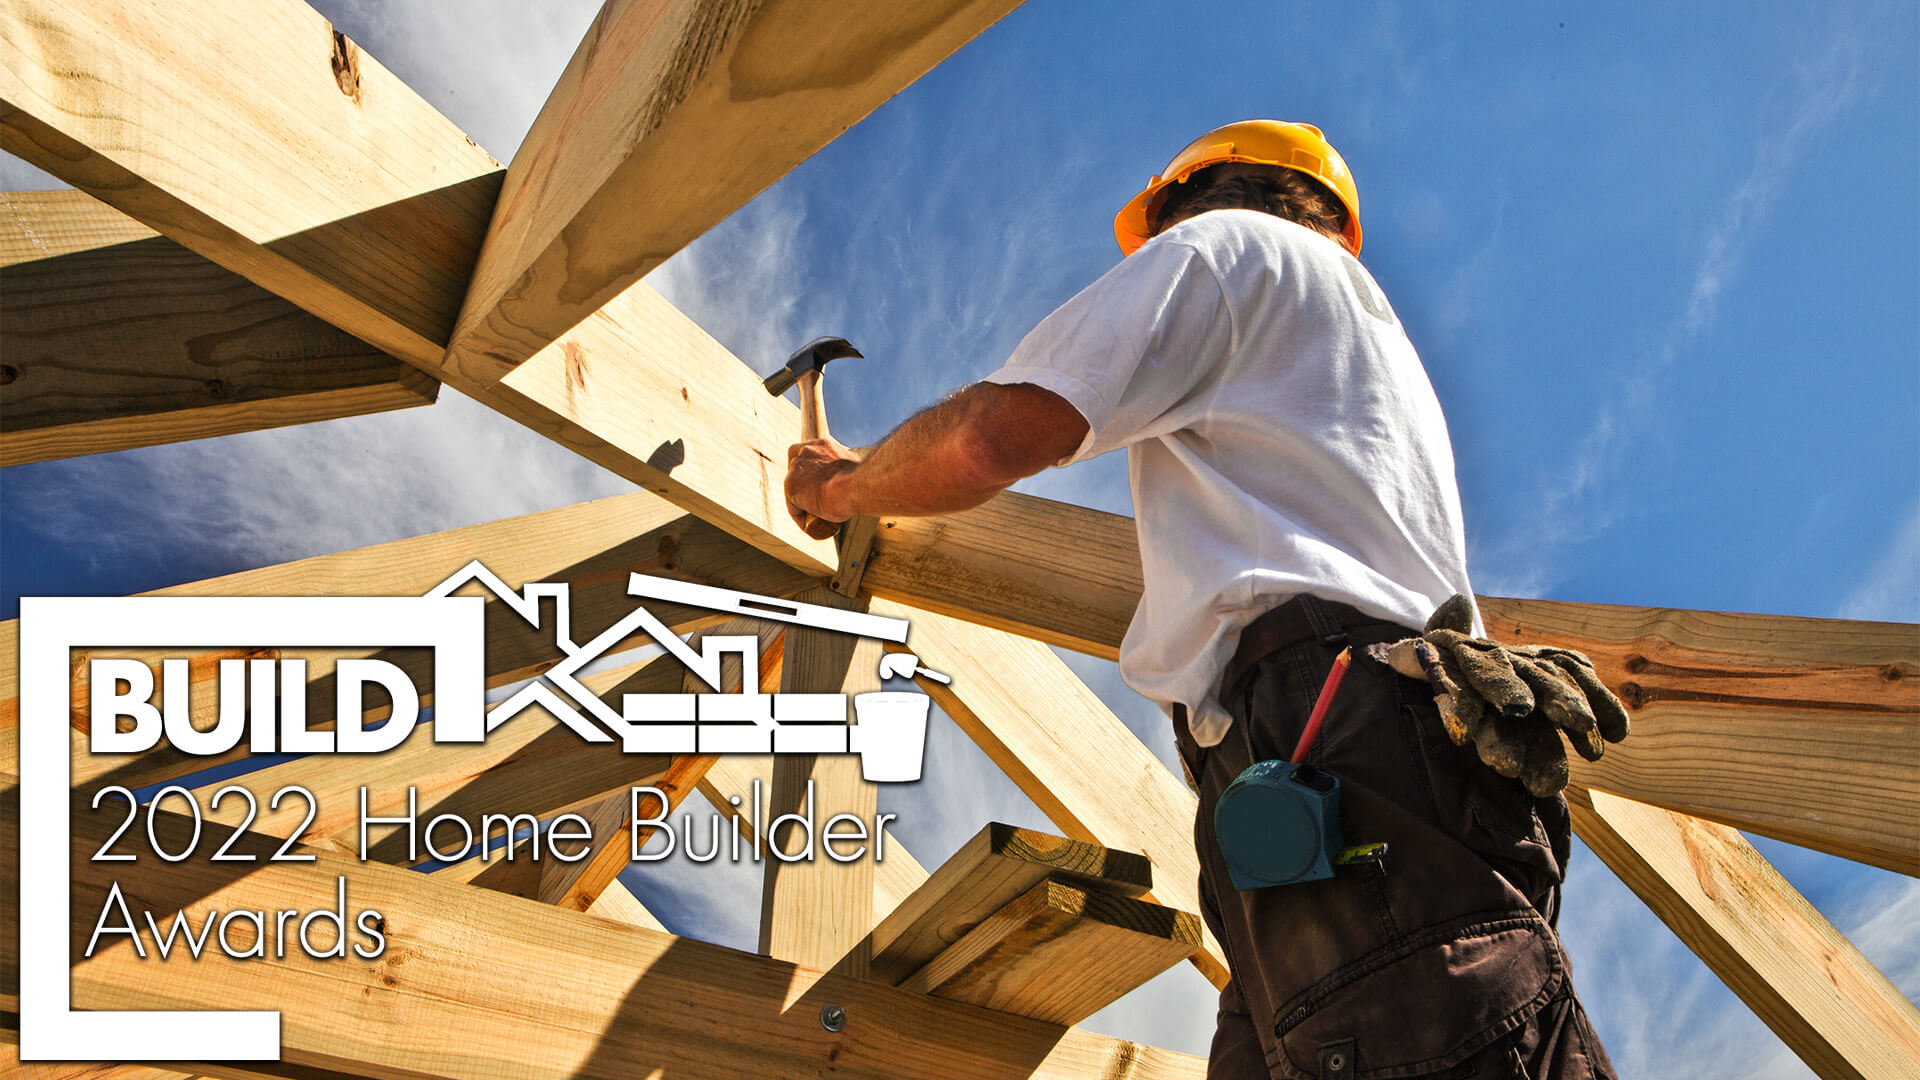 Carpenter building the wodden structure of a home. BUILD Home Builder 2022 Awards logo in the corner